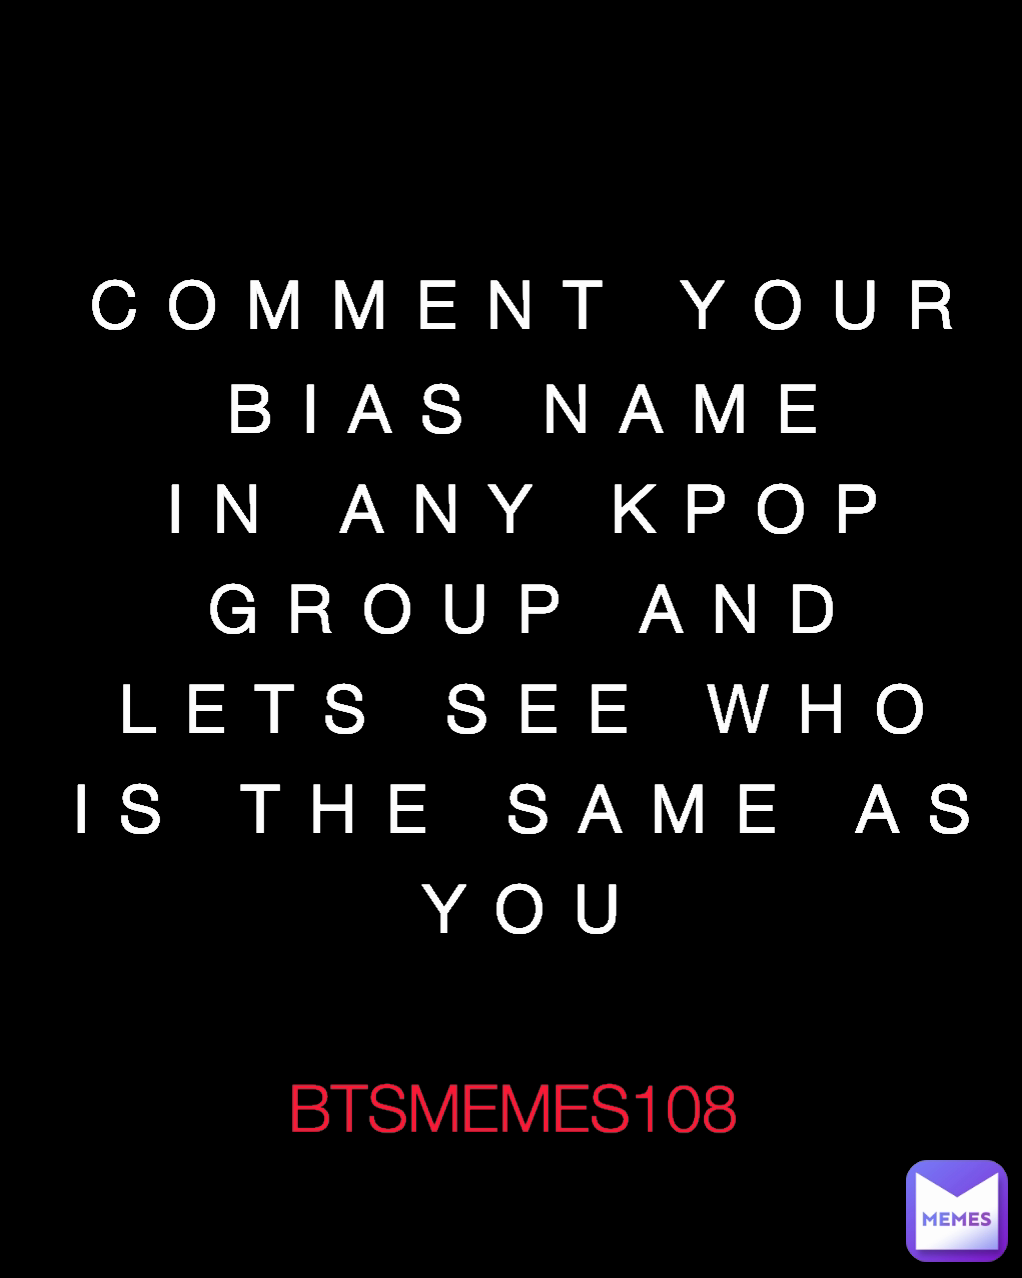 BTSMEMES108  COMMENT YOUR BIAS NAME IN ANY KPOP GROUP AND LETS SEE WHO IS THE SAME AS YOU